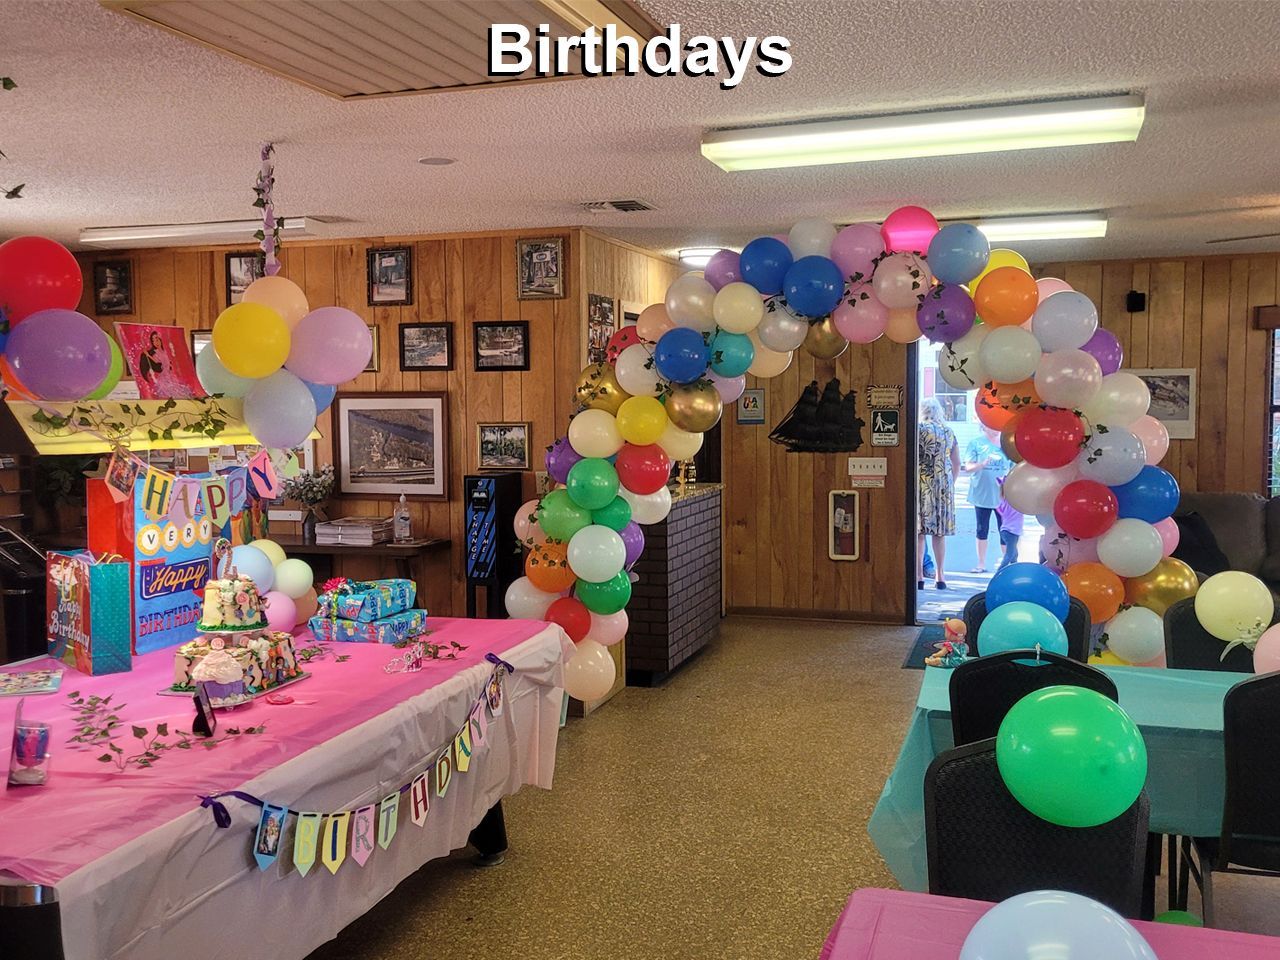 a room decorated with balloons and a sign that says birthdays